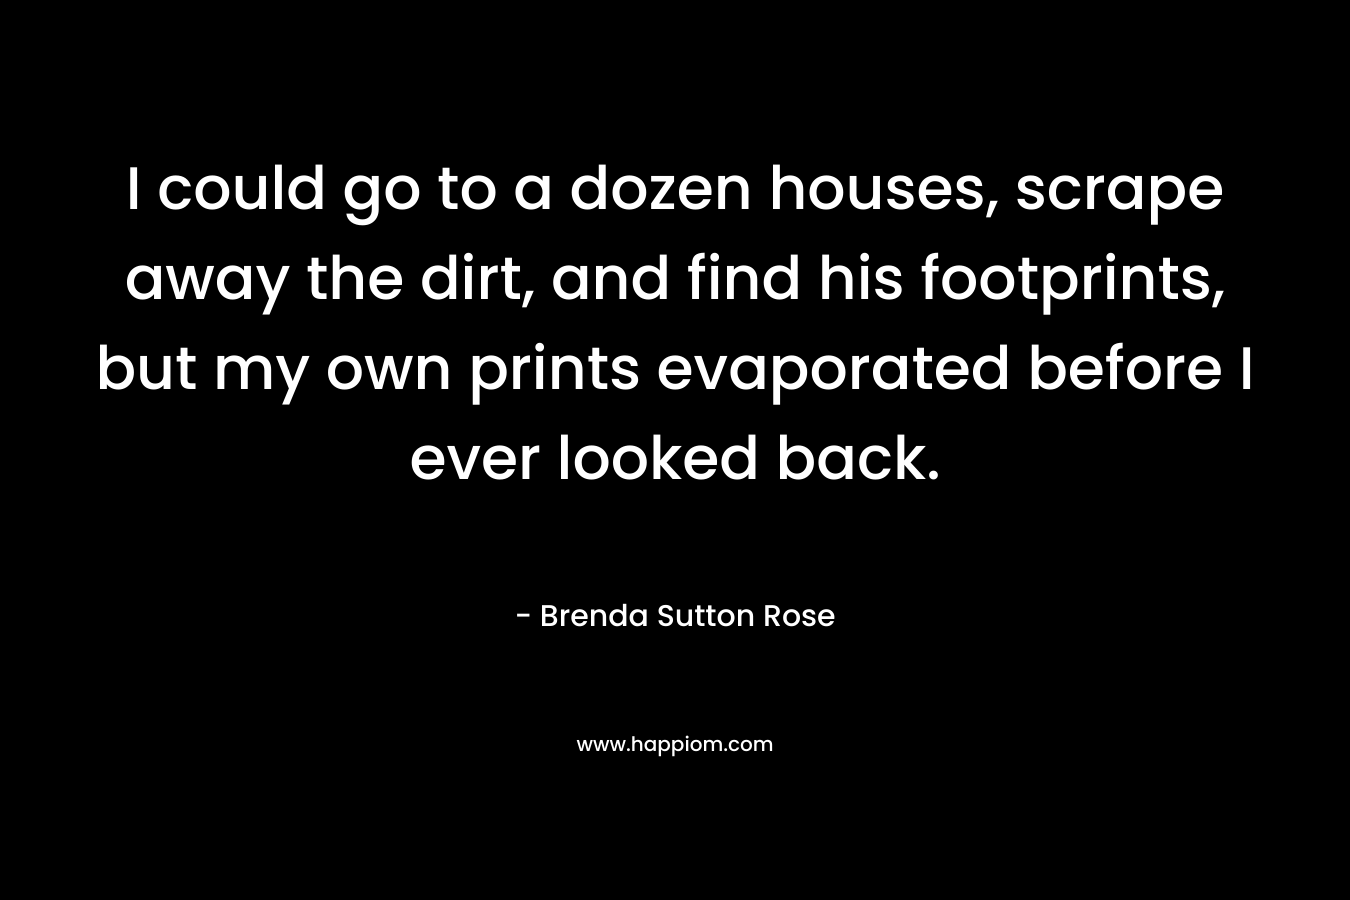 I could go to a dozen houses, scrape away the dirt, and find his footprints, but my own prints evaporated before I ever looked back. – Brenda Sutton Rose